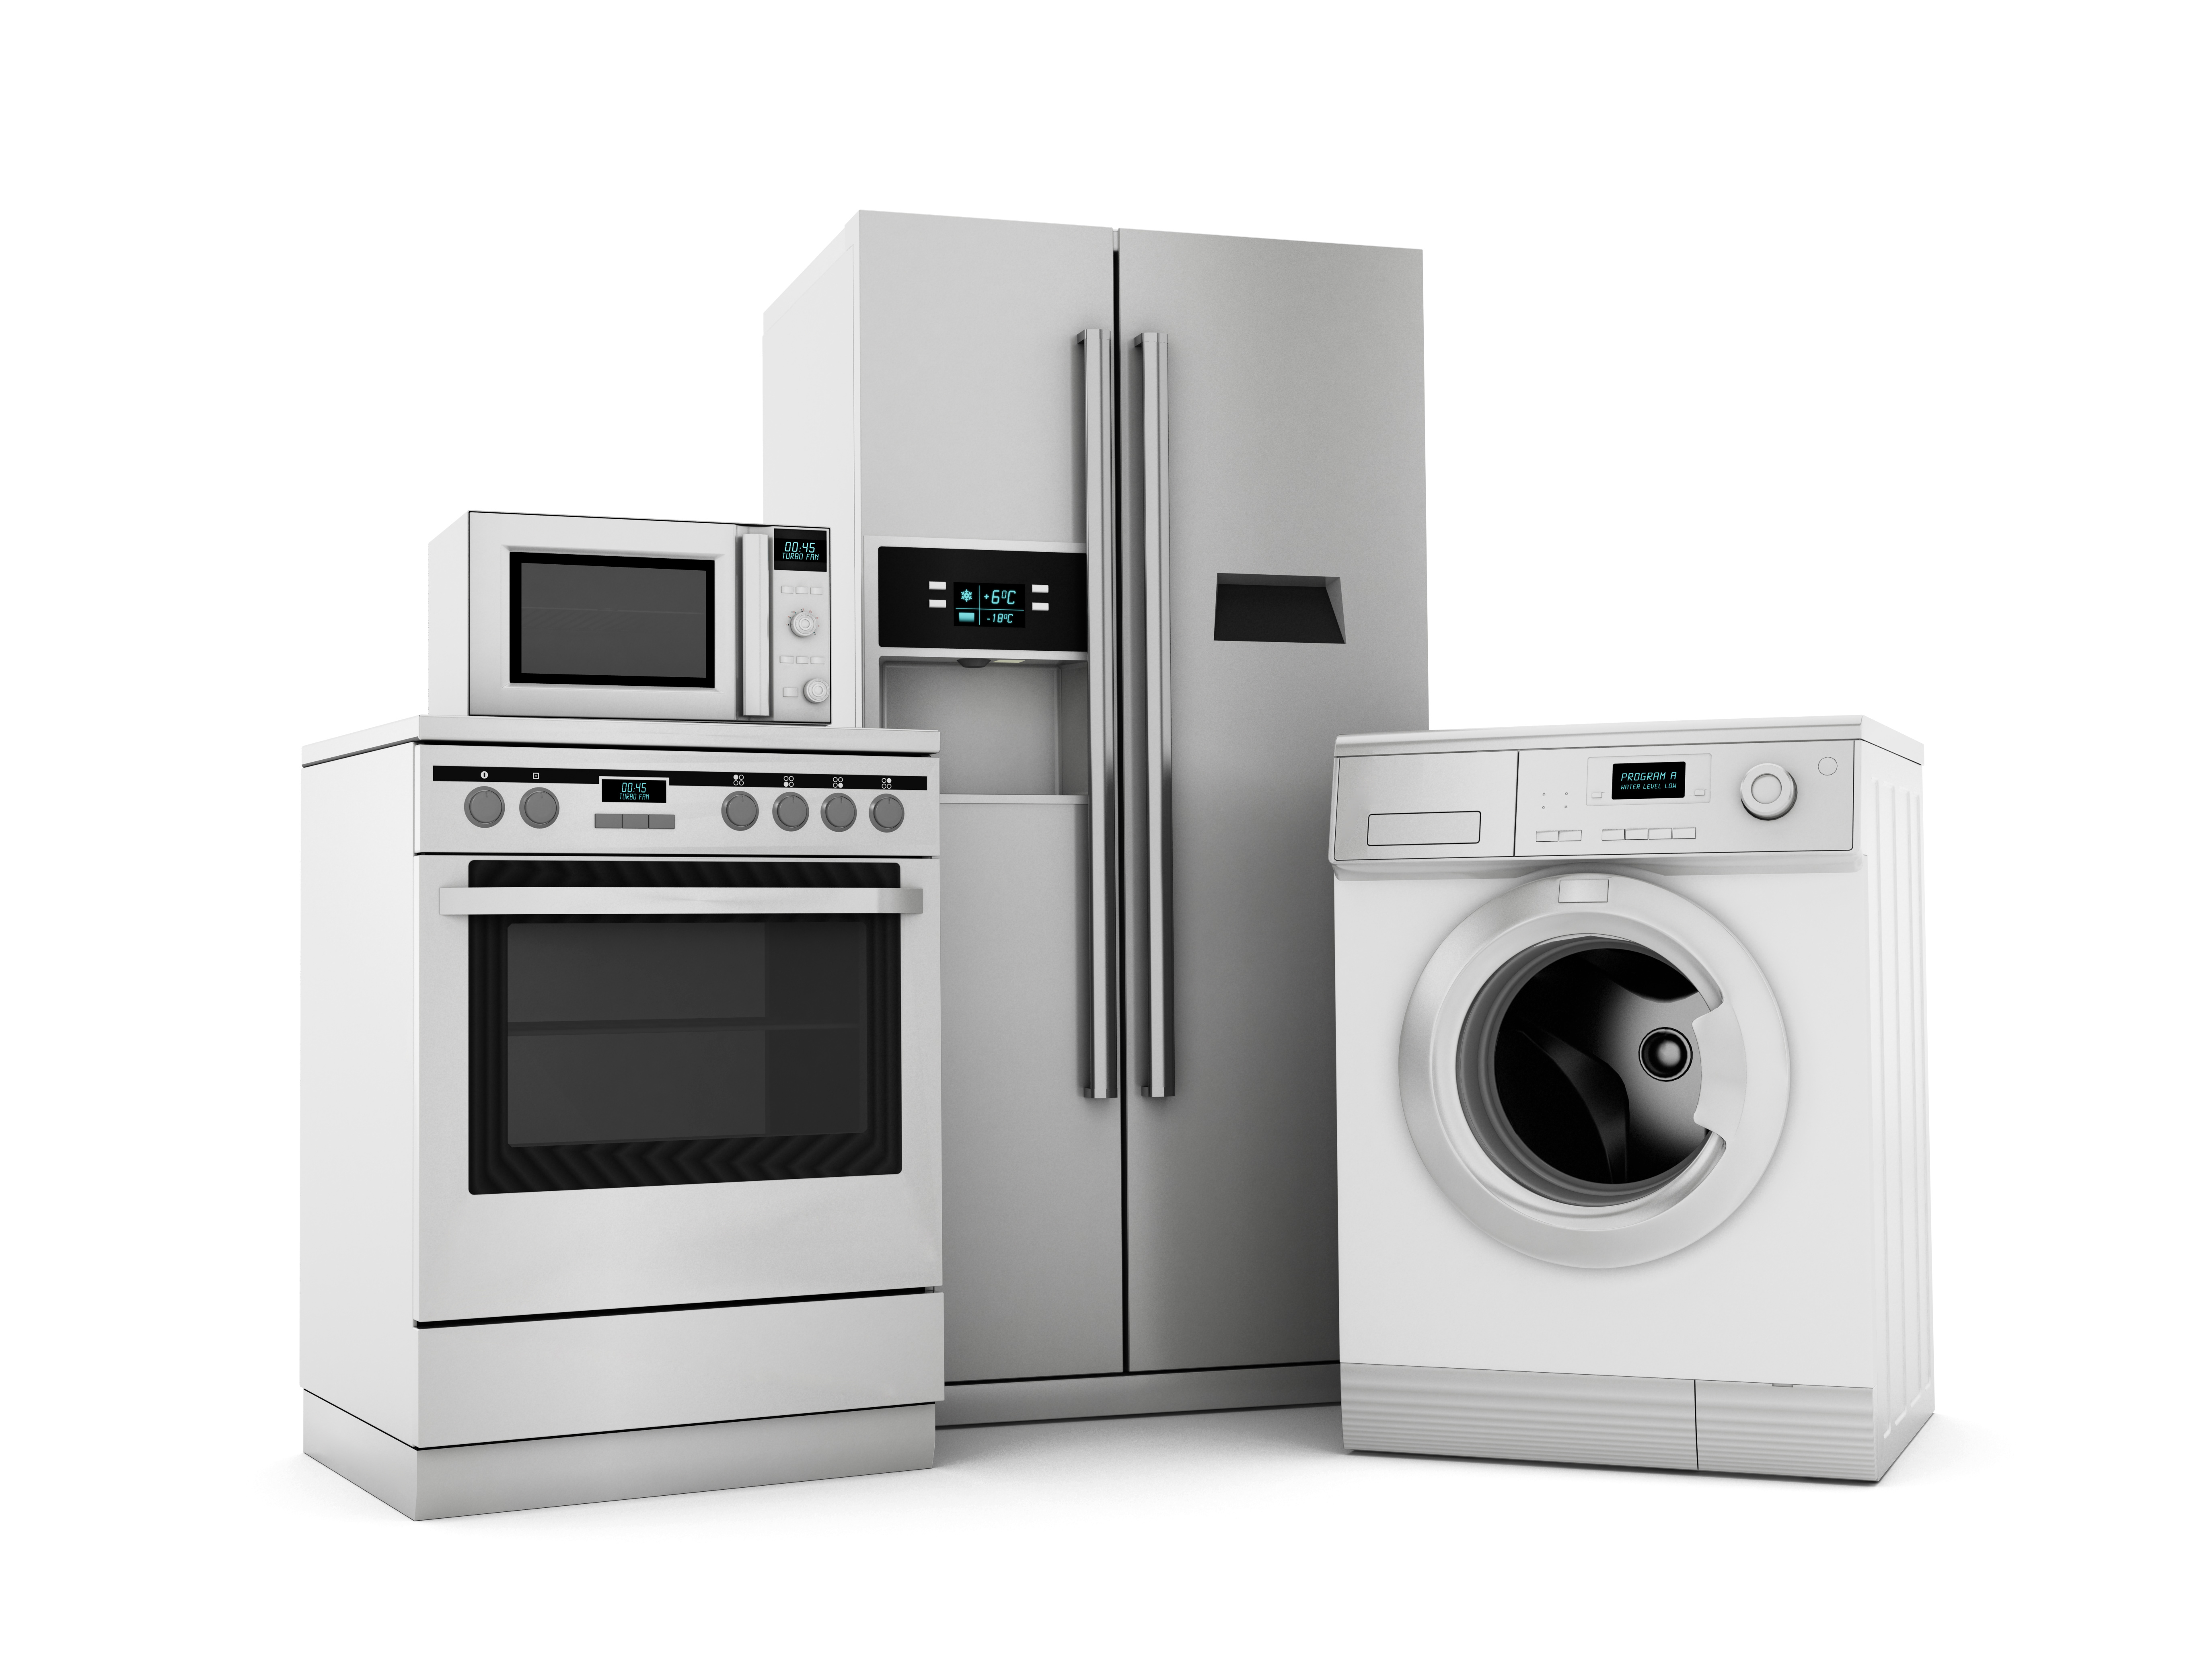 Home Warranties for your appliances